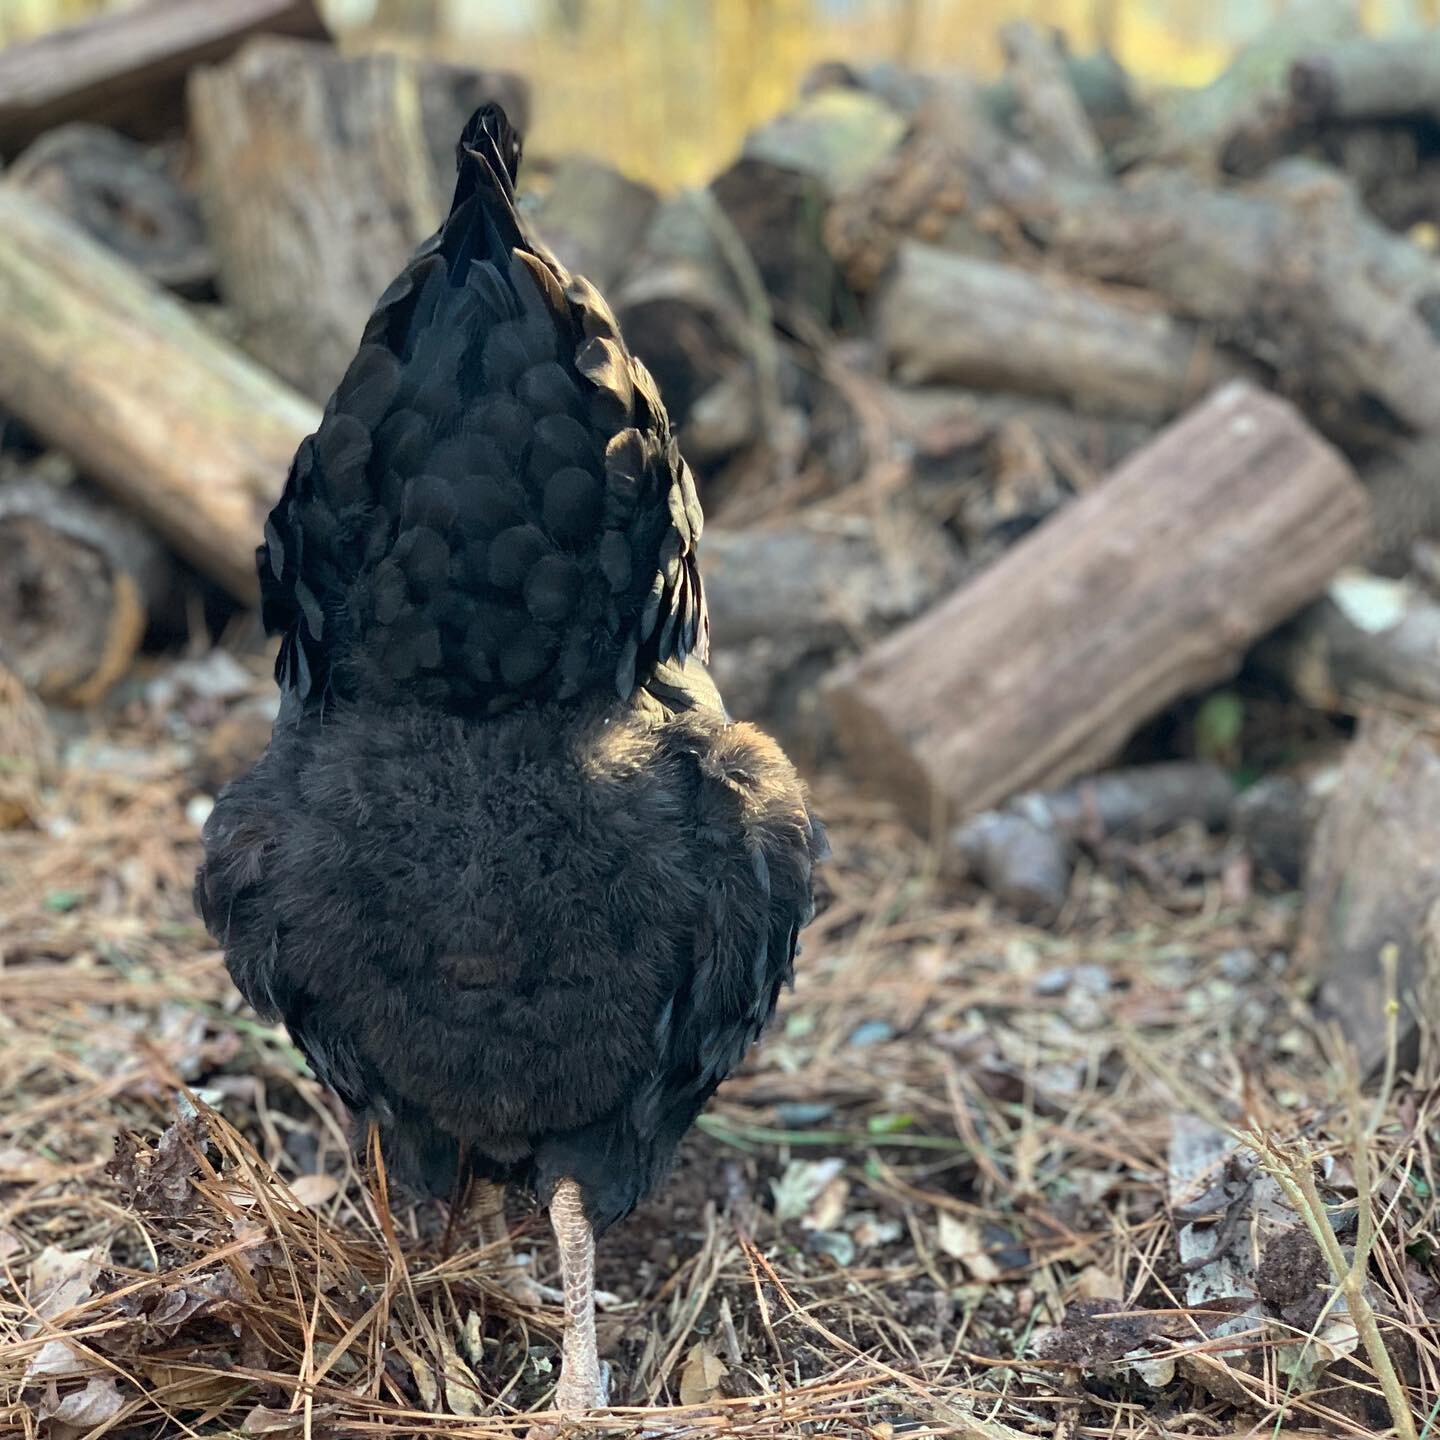 Happy #fluffybuttfriday 🐓 Looking forward to my girls laying eggs again.  Feathers are finally starting to fill in and their winter &lsquo;rest&rsquo; is almost over. 🥚 🍳 🥚

#backyardchickens #chickens #chickensofinstagram #lifeouthere #hobbyfarm